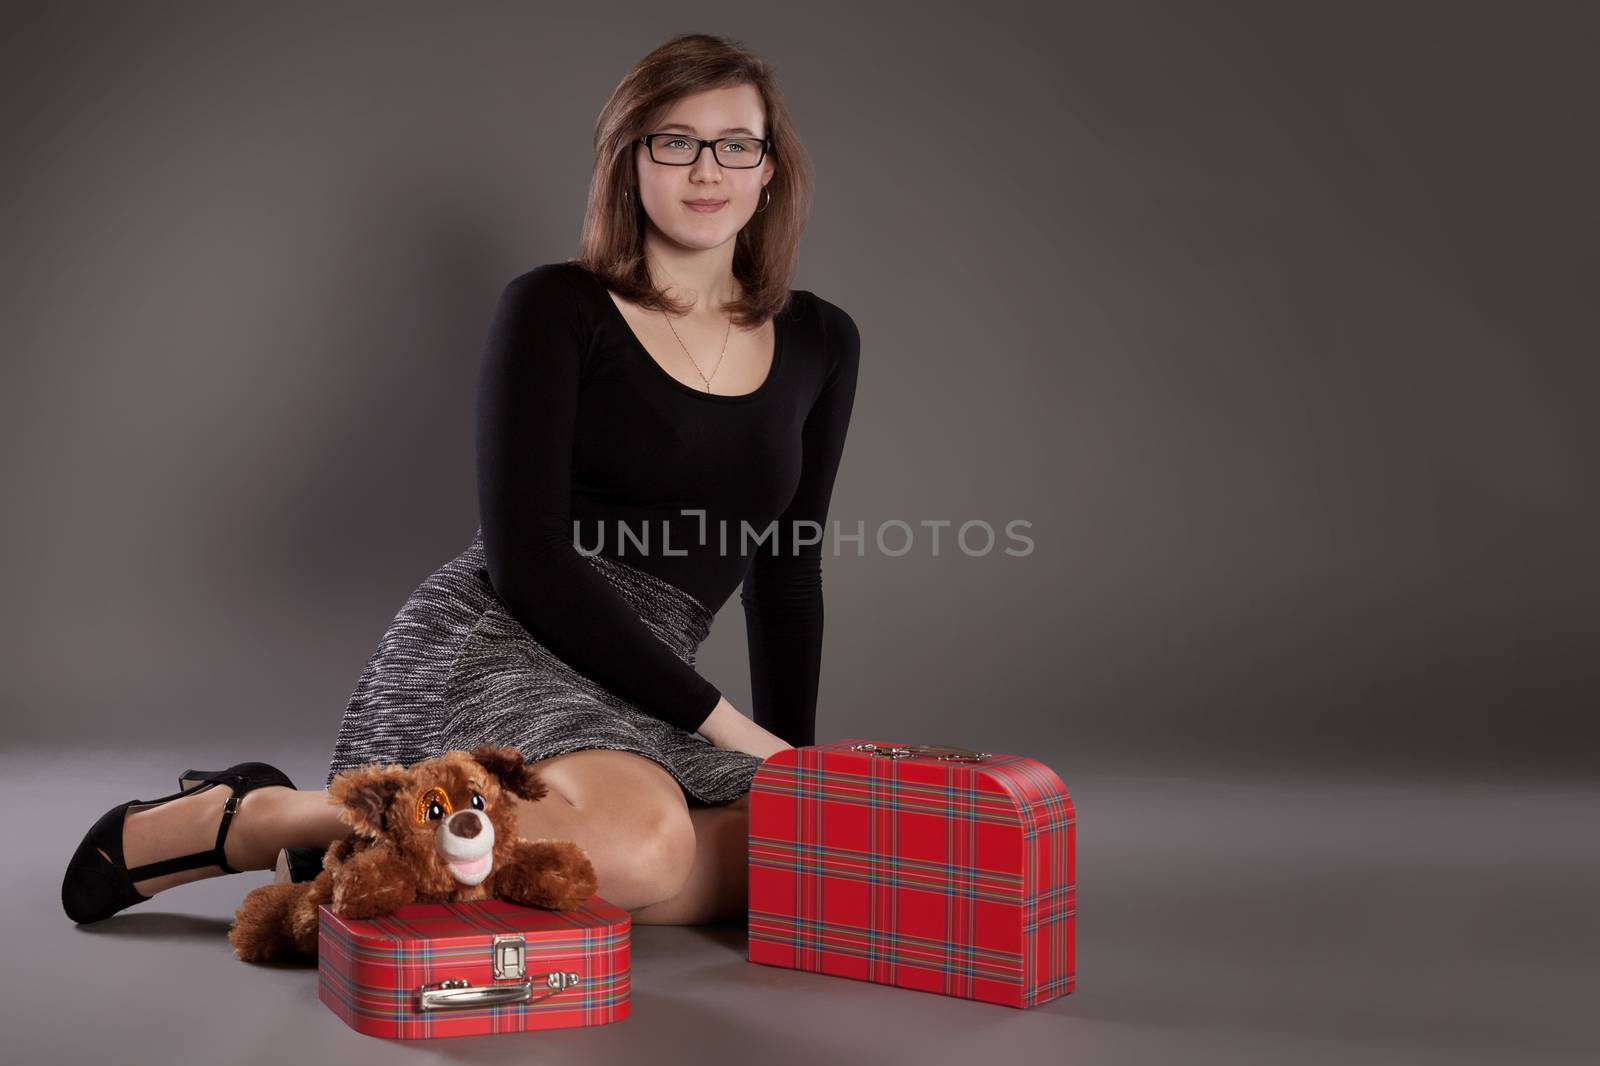 A young girl with suitcases and a soft toy